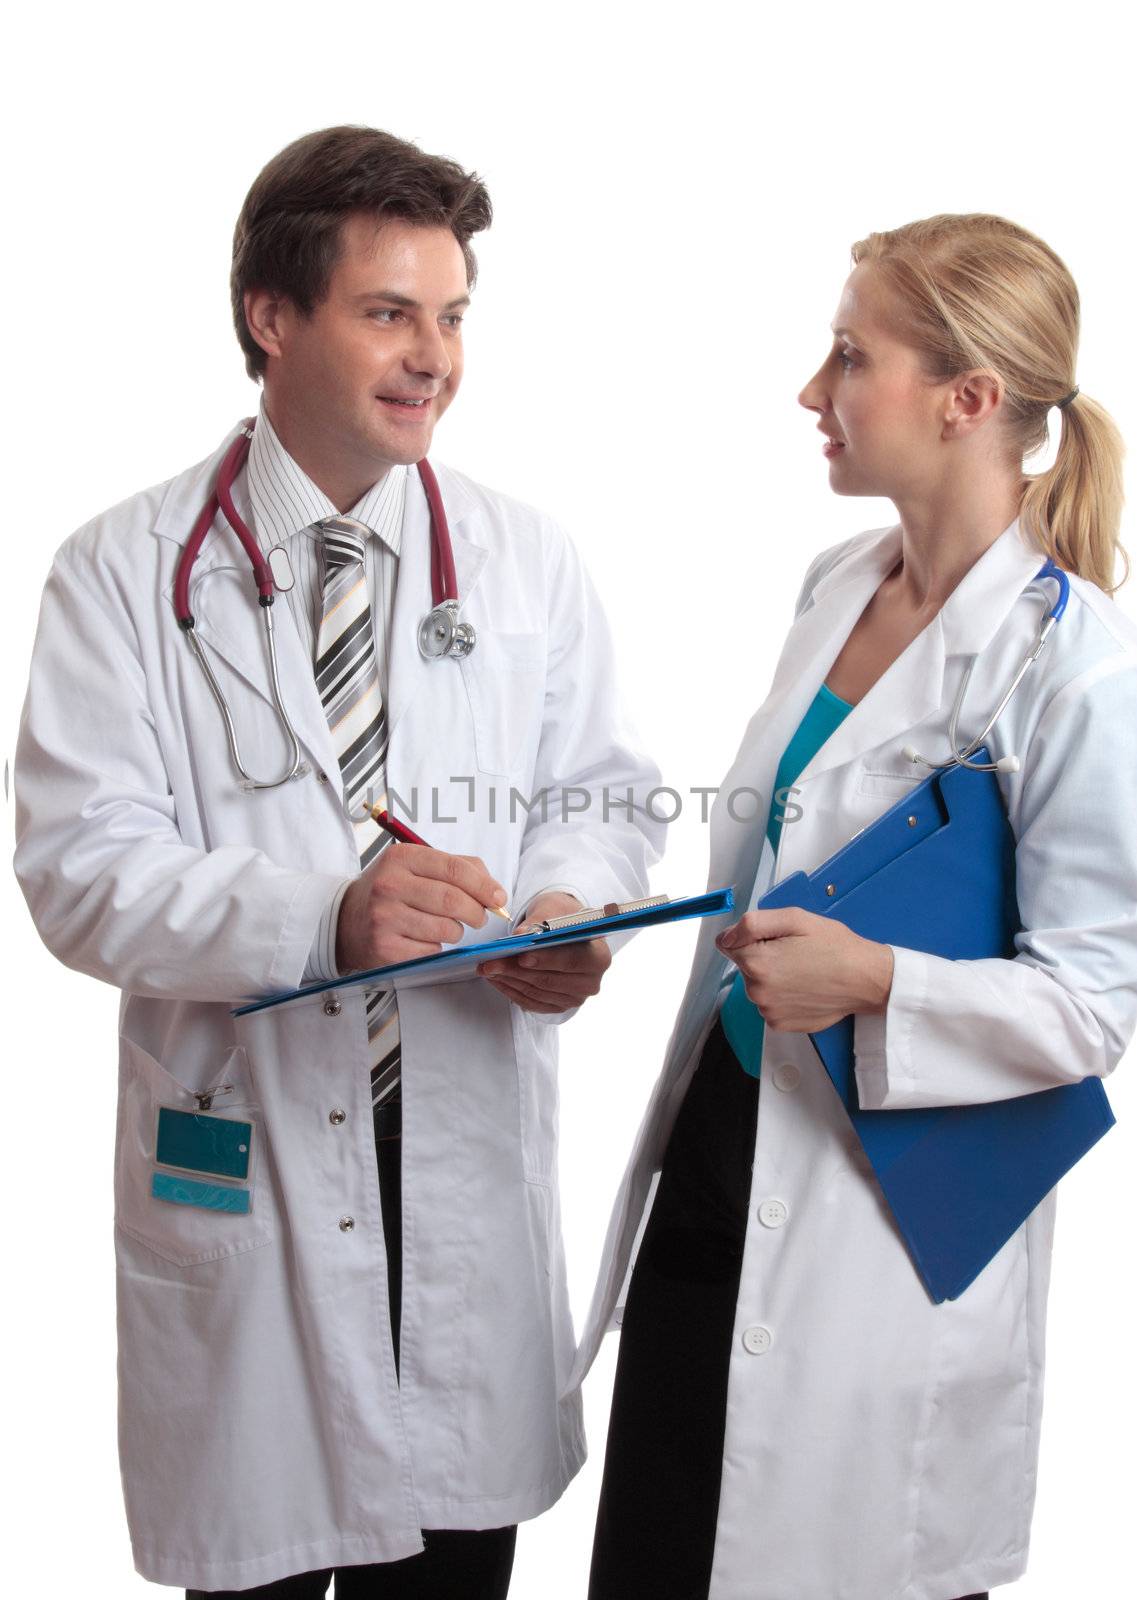 Doctors stand together in friendly discussion